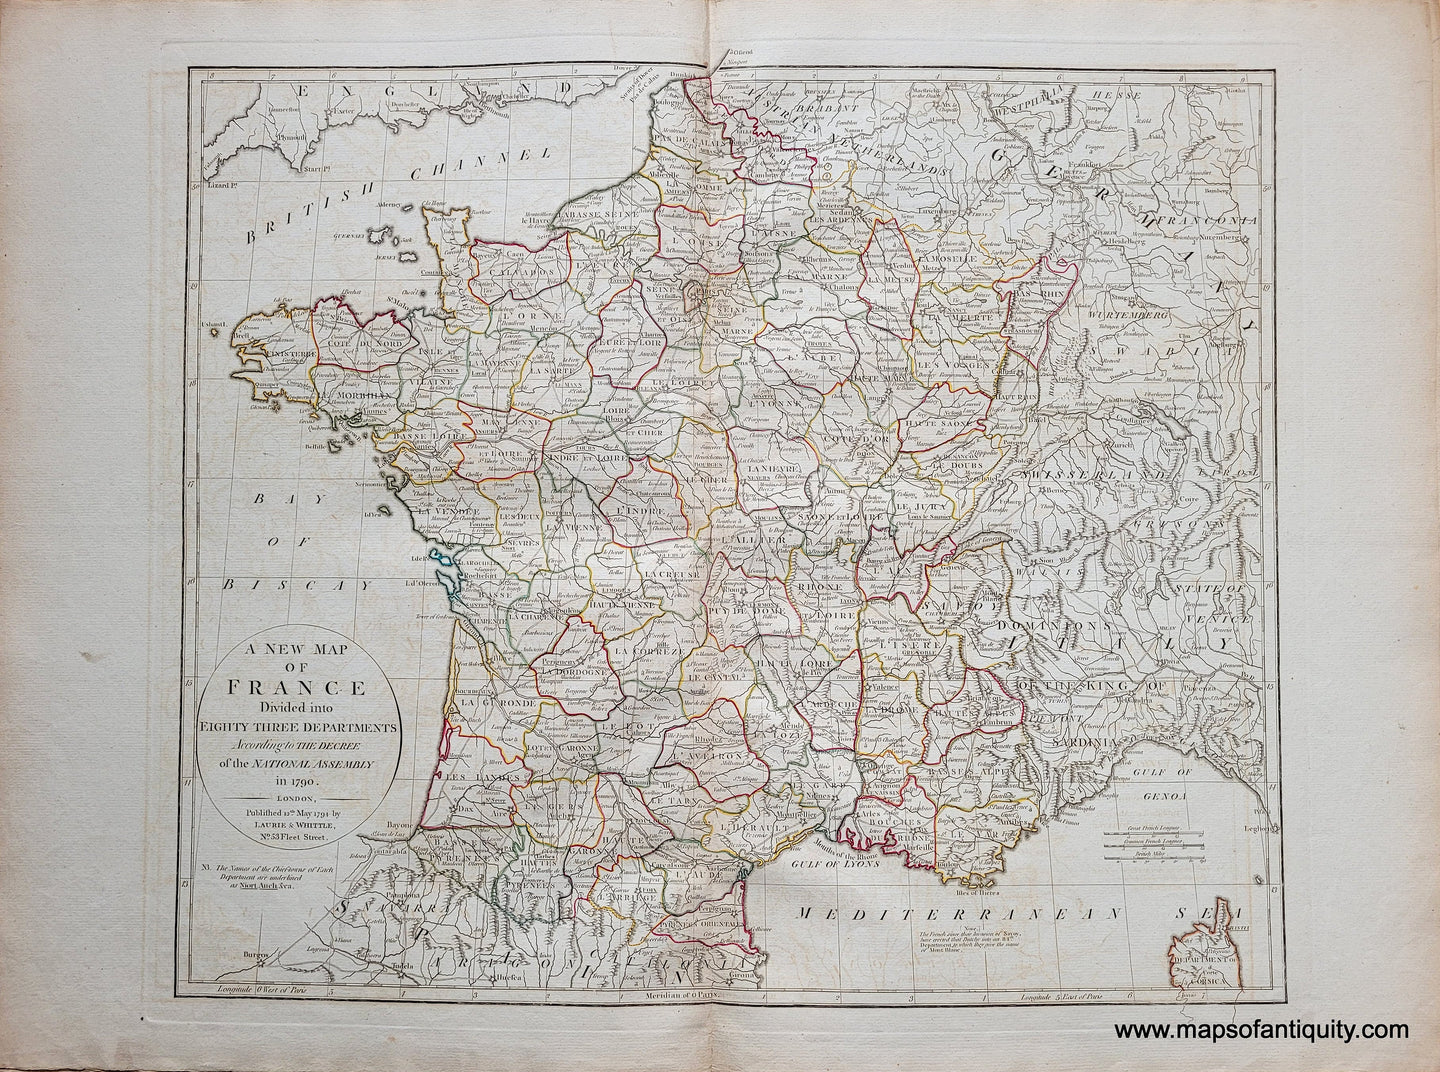 Genuine-Antique-Map-A-New-Map-of-France-Divided-into-Eighty-Three-Departments-According-to-the-Decree-of-the-National-Assembly-in-1790.-1794-Laurie-and-Whittle-Maps-Of-Antiquity